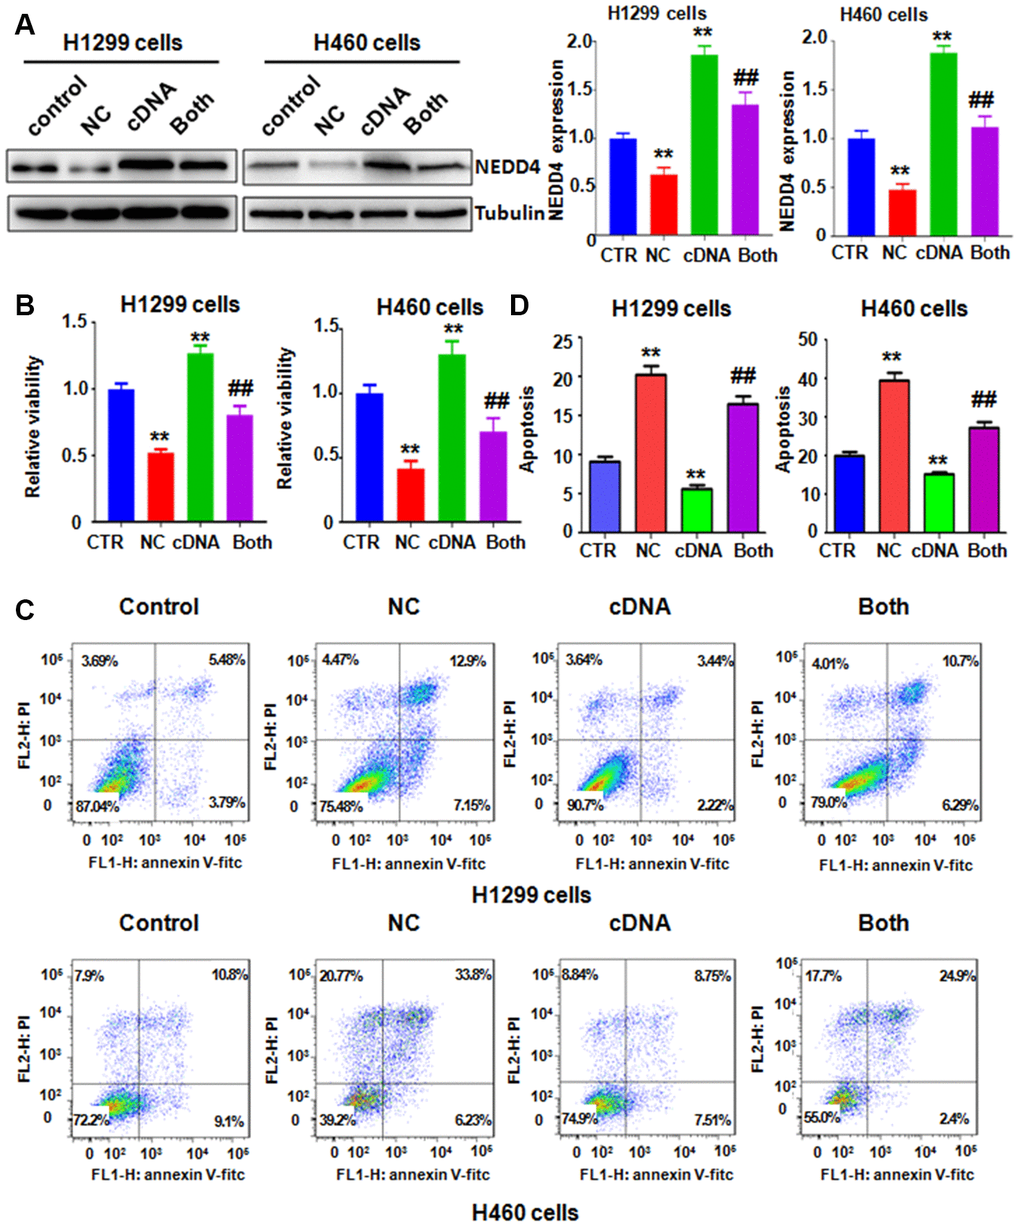 NEDD4 overexpression rescues NC-mediated cell growth suppression and apoptosis. (A) Left panel: NEDD4 expression was tested by immunoblotting in lung cancer cells with NEDD4 plasmid transfection plus NC treatment. Right panel: Quantitative data are shown for NEDD4 levels. **P##pB) The MTT assay was carried out to test the viability of lung cancer cells after NEDD4 overexpression and NC treatment. (C) Apoptosis of lung cancer cells was examined by flow cytometry after the combination treatment. (D). Apoptosis rates were presented for panel C.